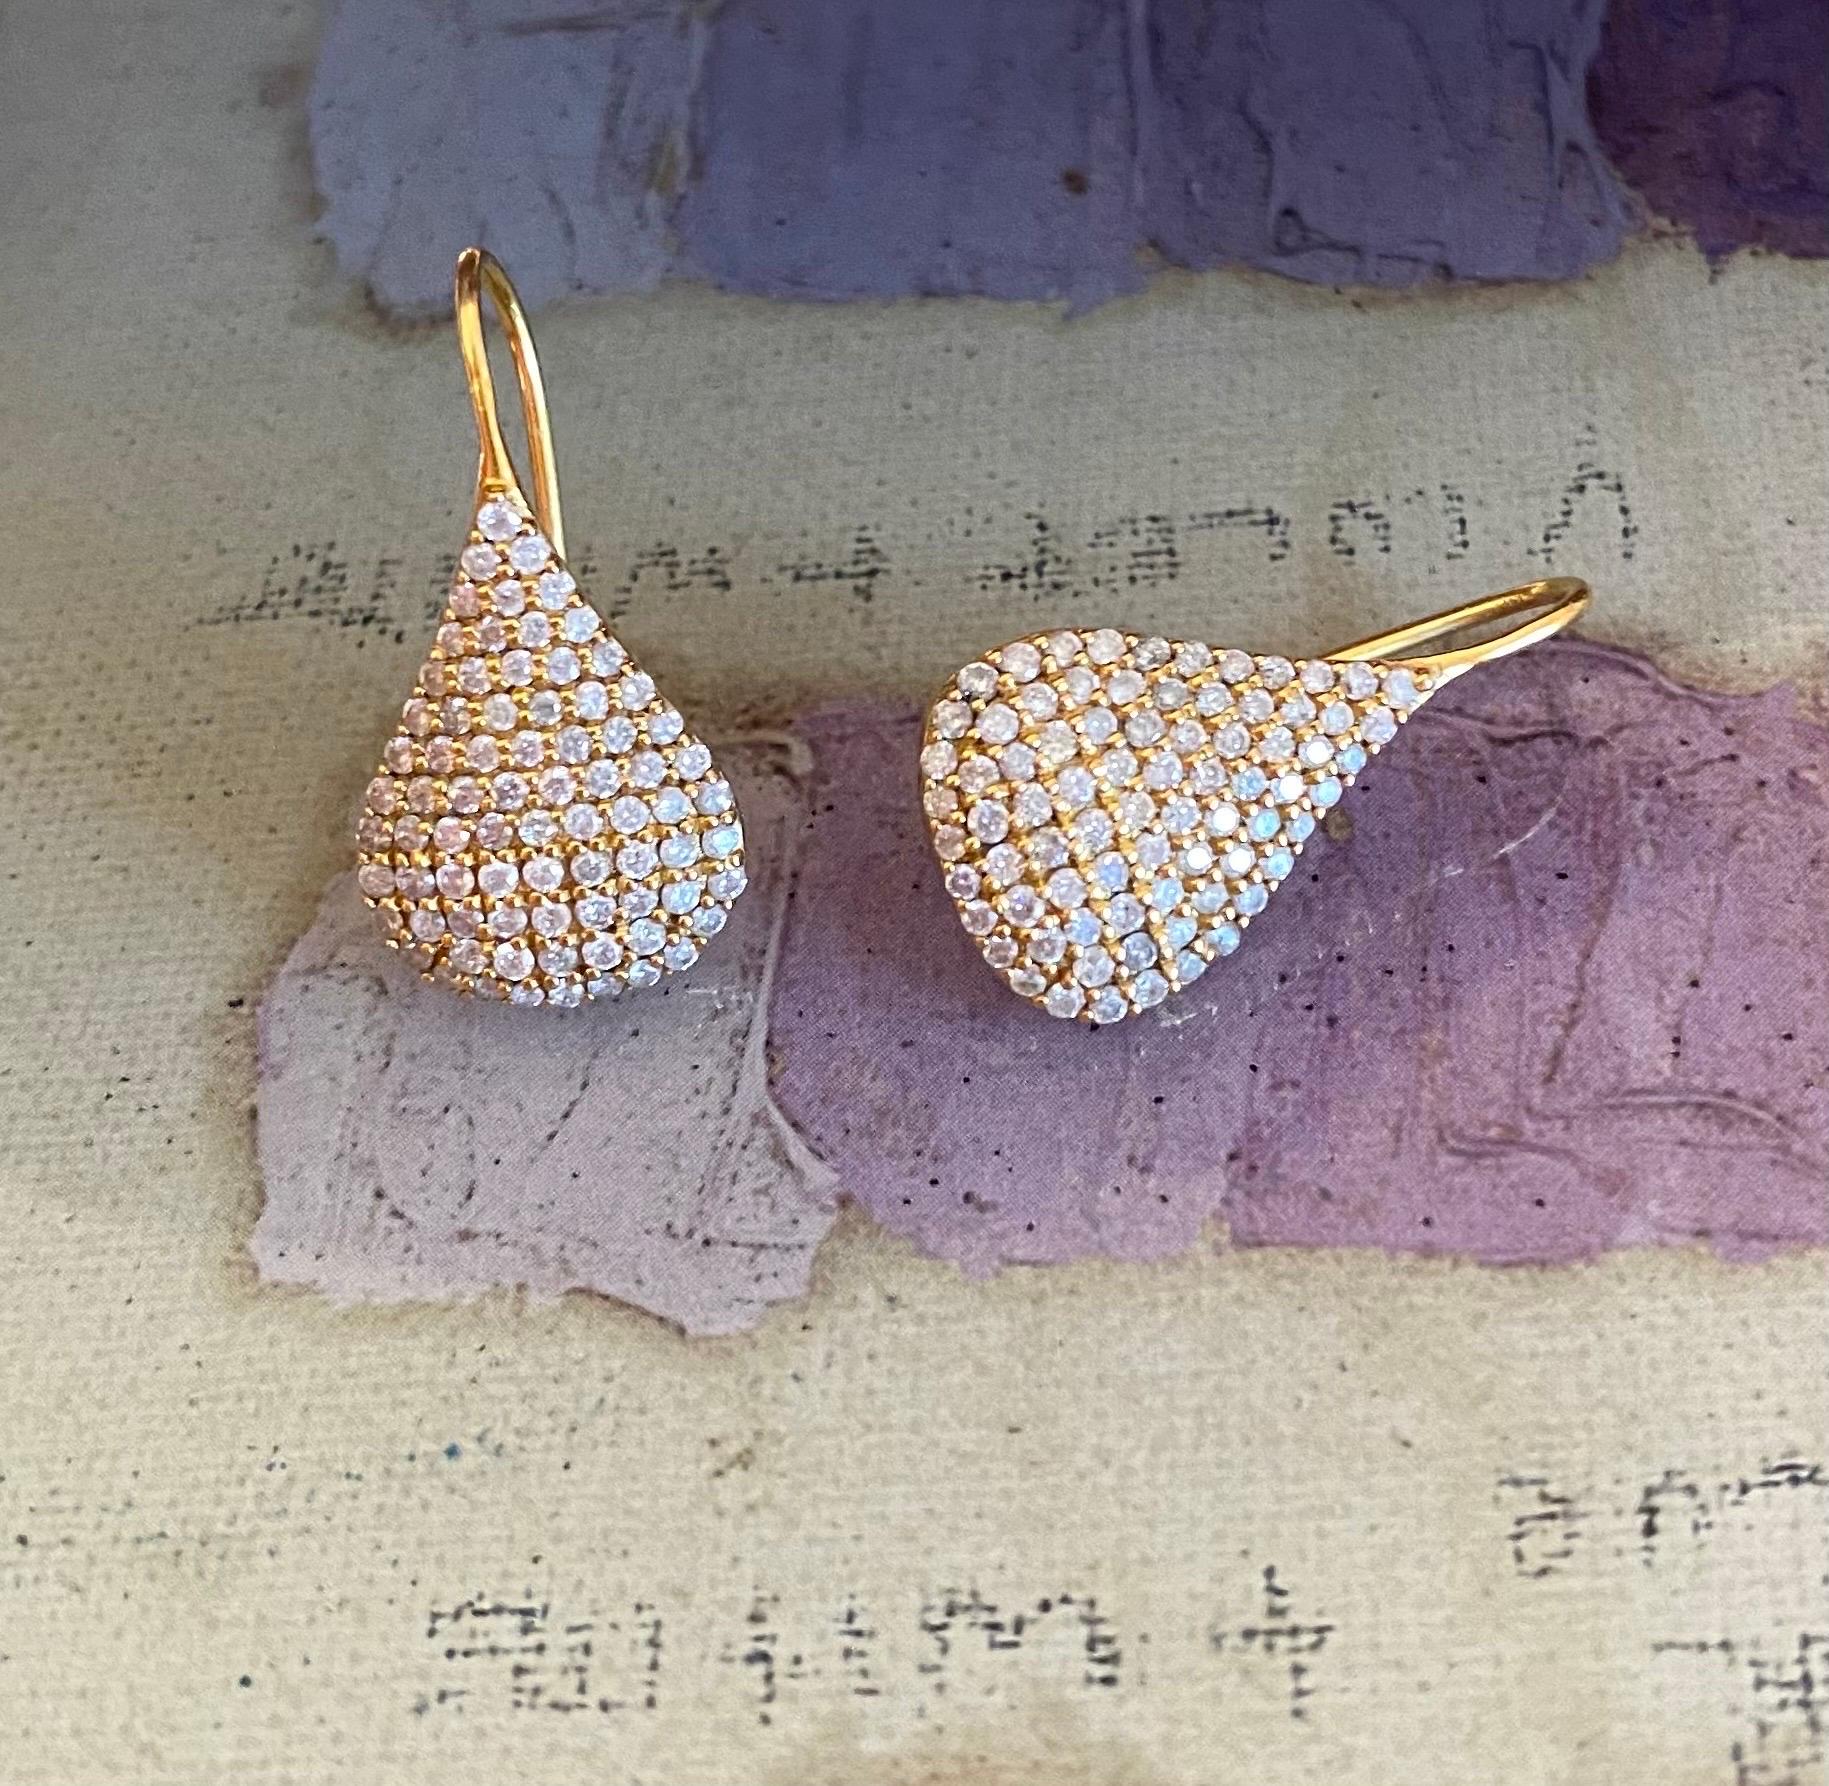 1.12 carats of Diamond pave and 18kt Gold make these earrings elegant and simple, with a lot of sparkle. These beautiful earrings will add the perfect finishing touch to every outfit and every occasion.  Ships directly from original designer, Lauren